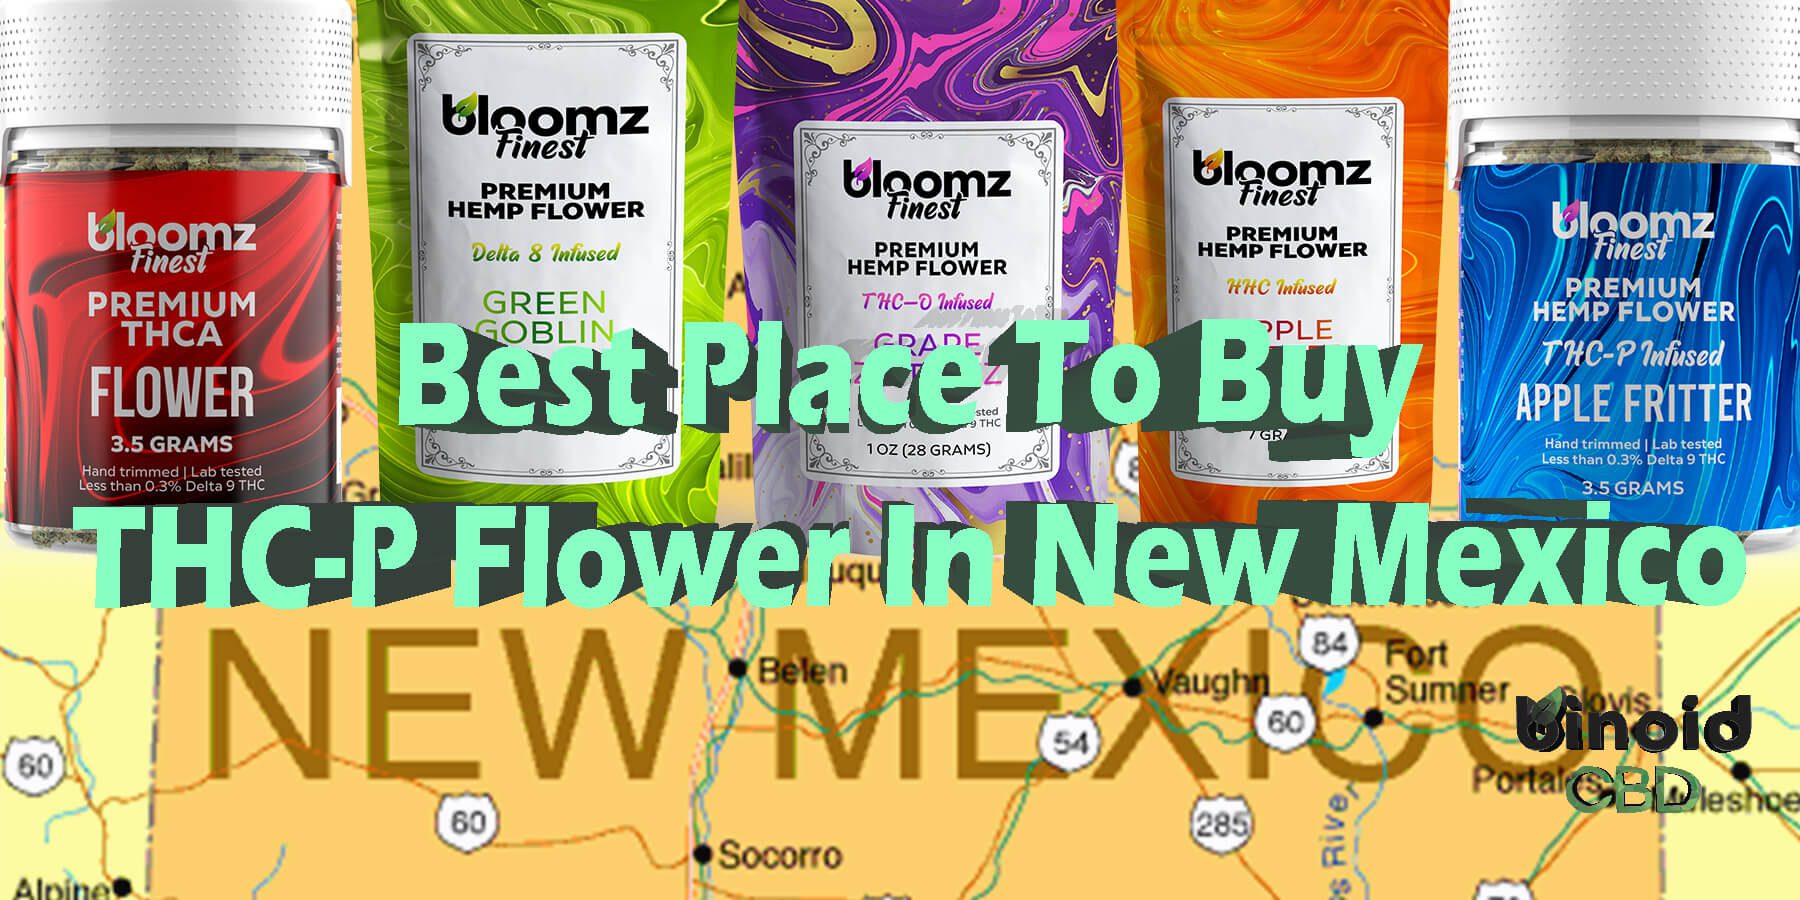 Buy THCP Flower New Mexico Get Online Near Me For Sale Best Brand Strongest Real Legal Store Shop Reddit